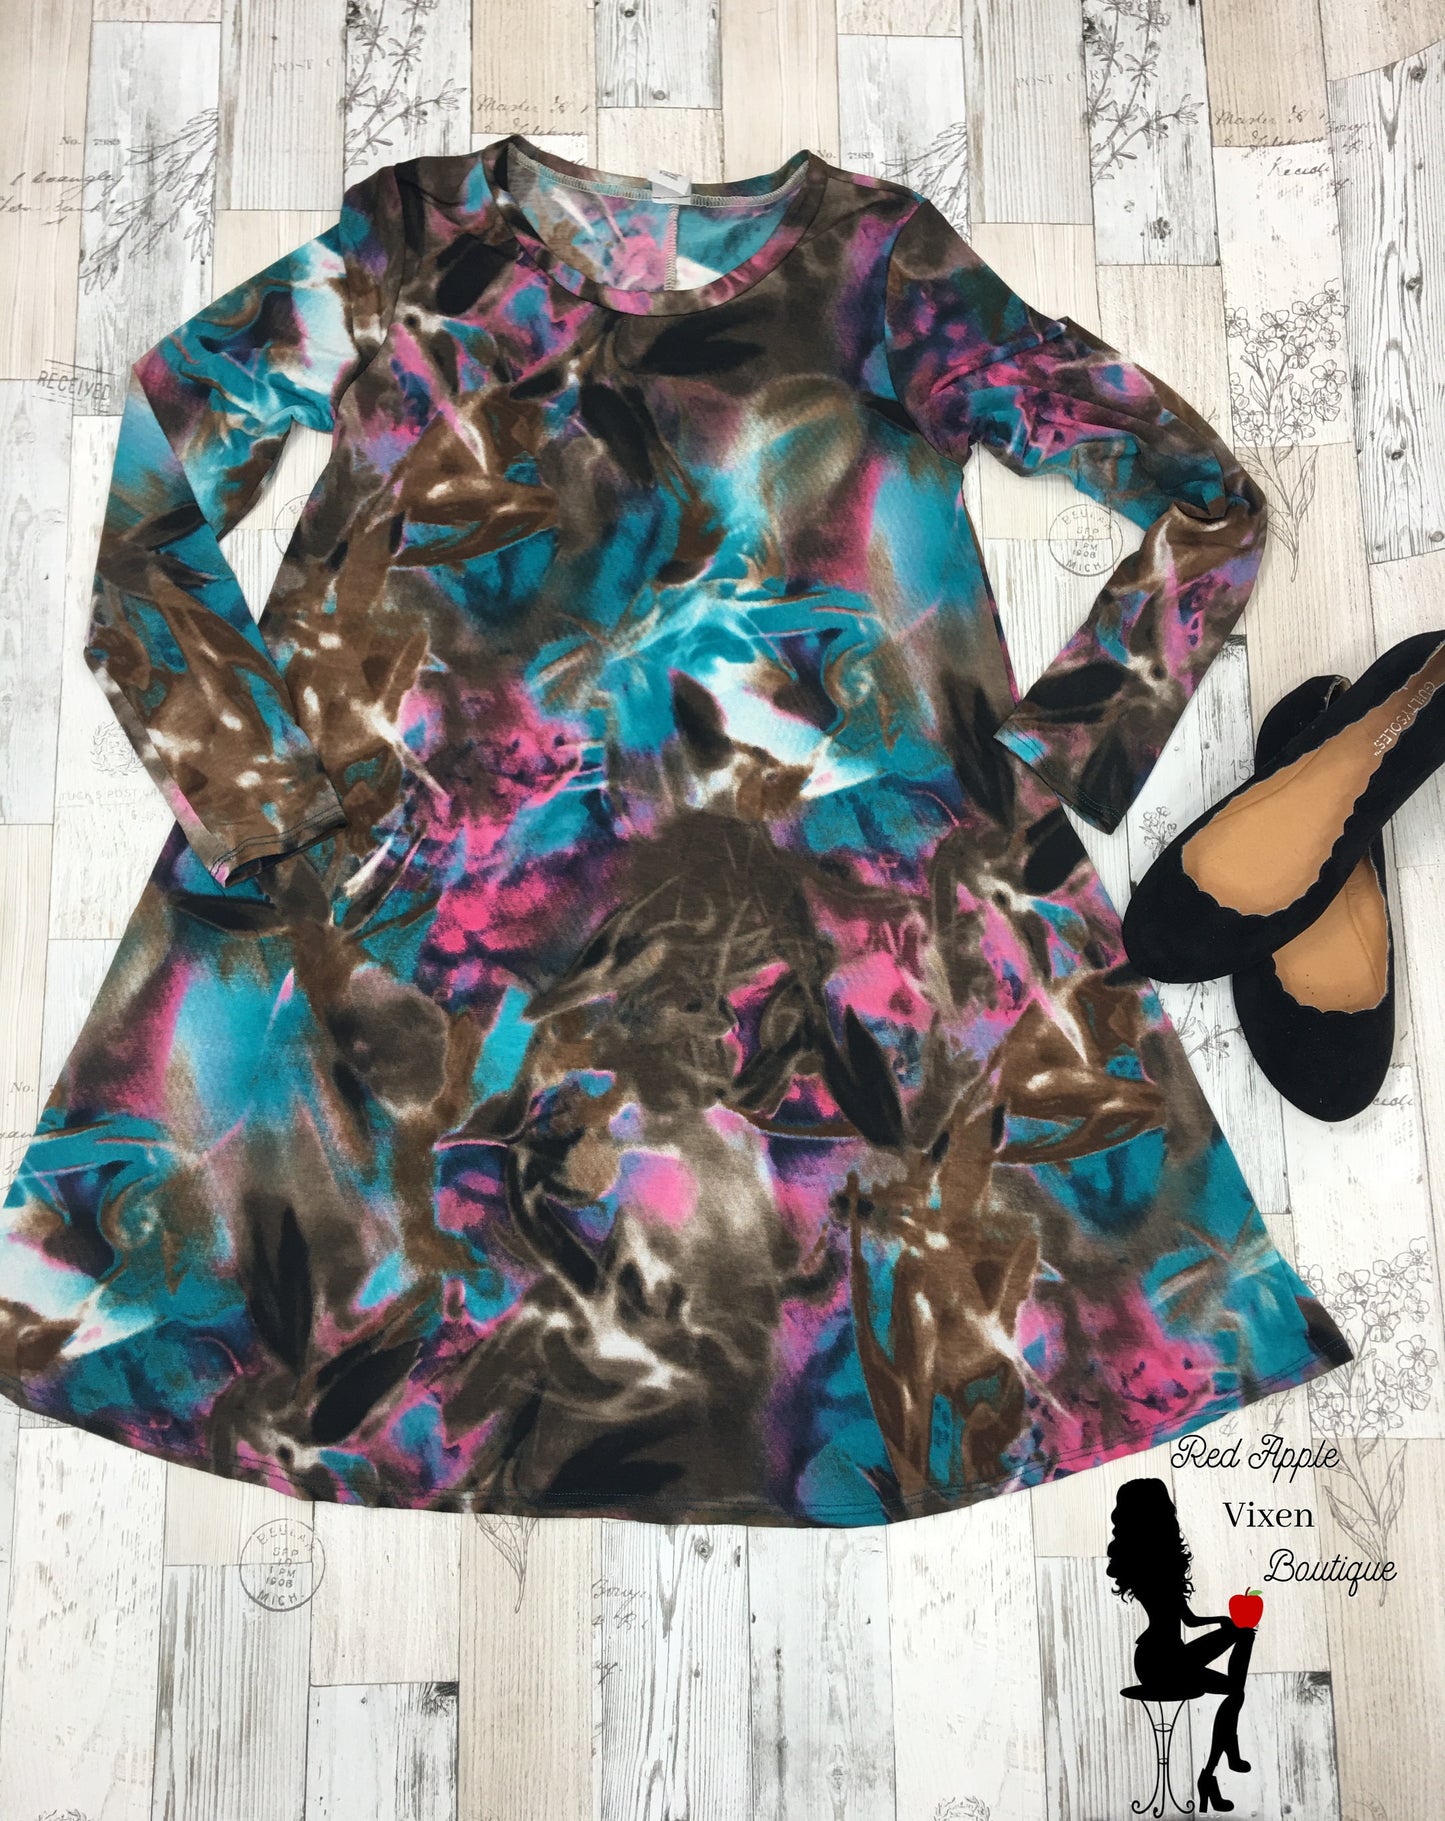 Brown Teal and Pink Tie Dye Dress - Red Apple Vixen Boutique